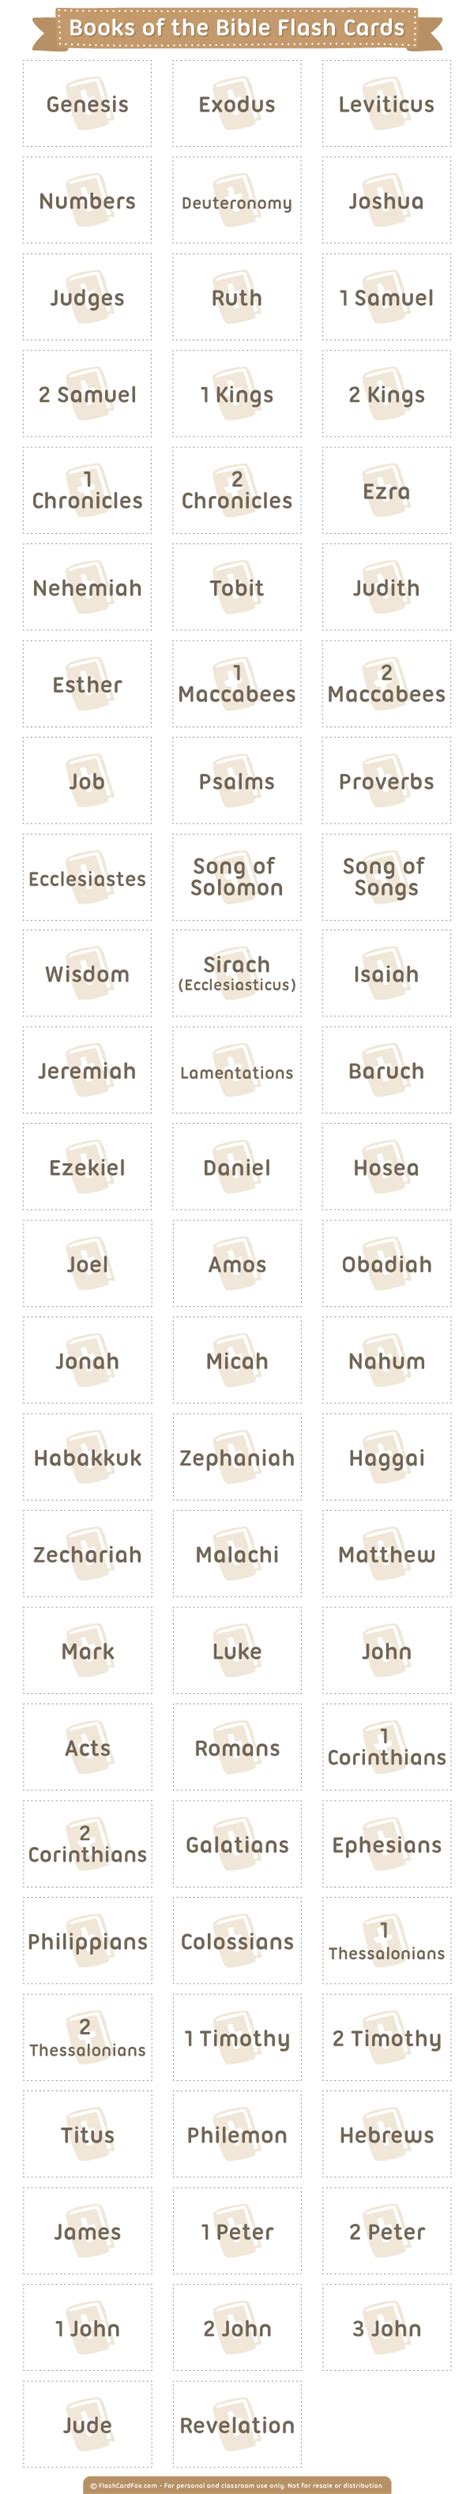 Free Printable Books Of The Bible Flashcards
